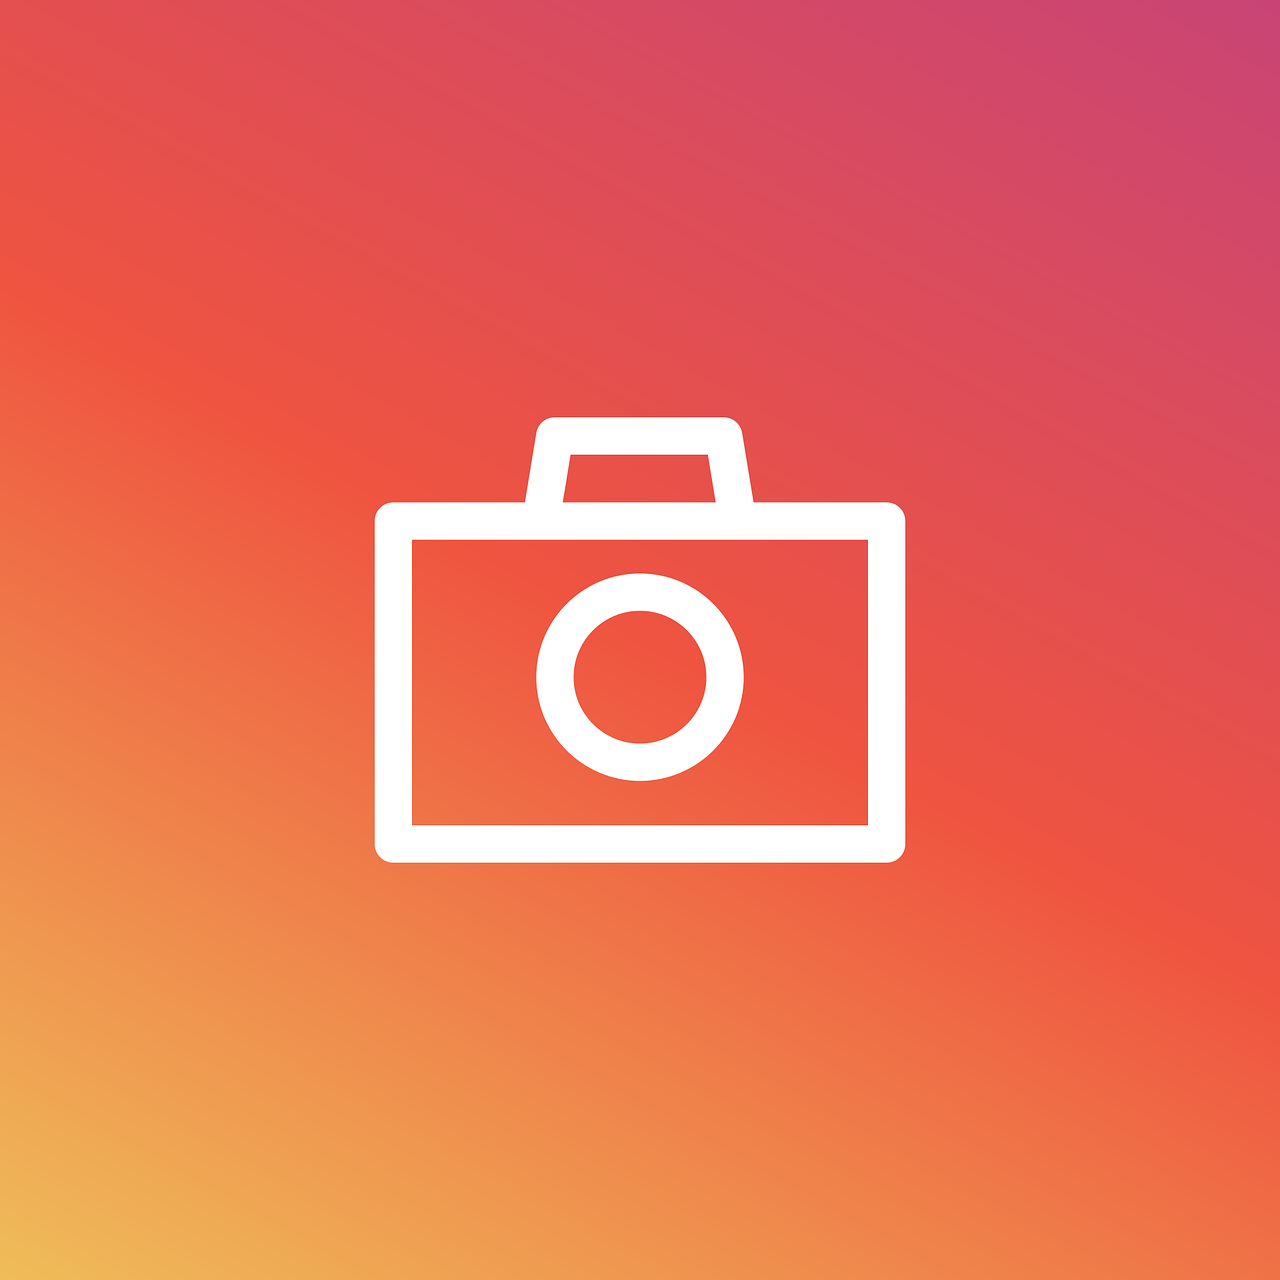 Download free photo of Instagram,camera,icon,photo,hipster - from needpix.com